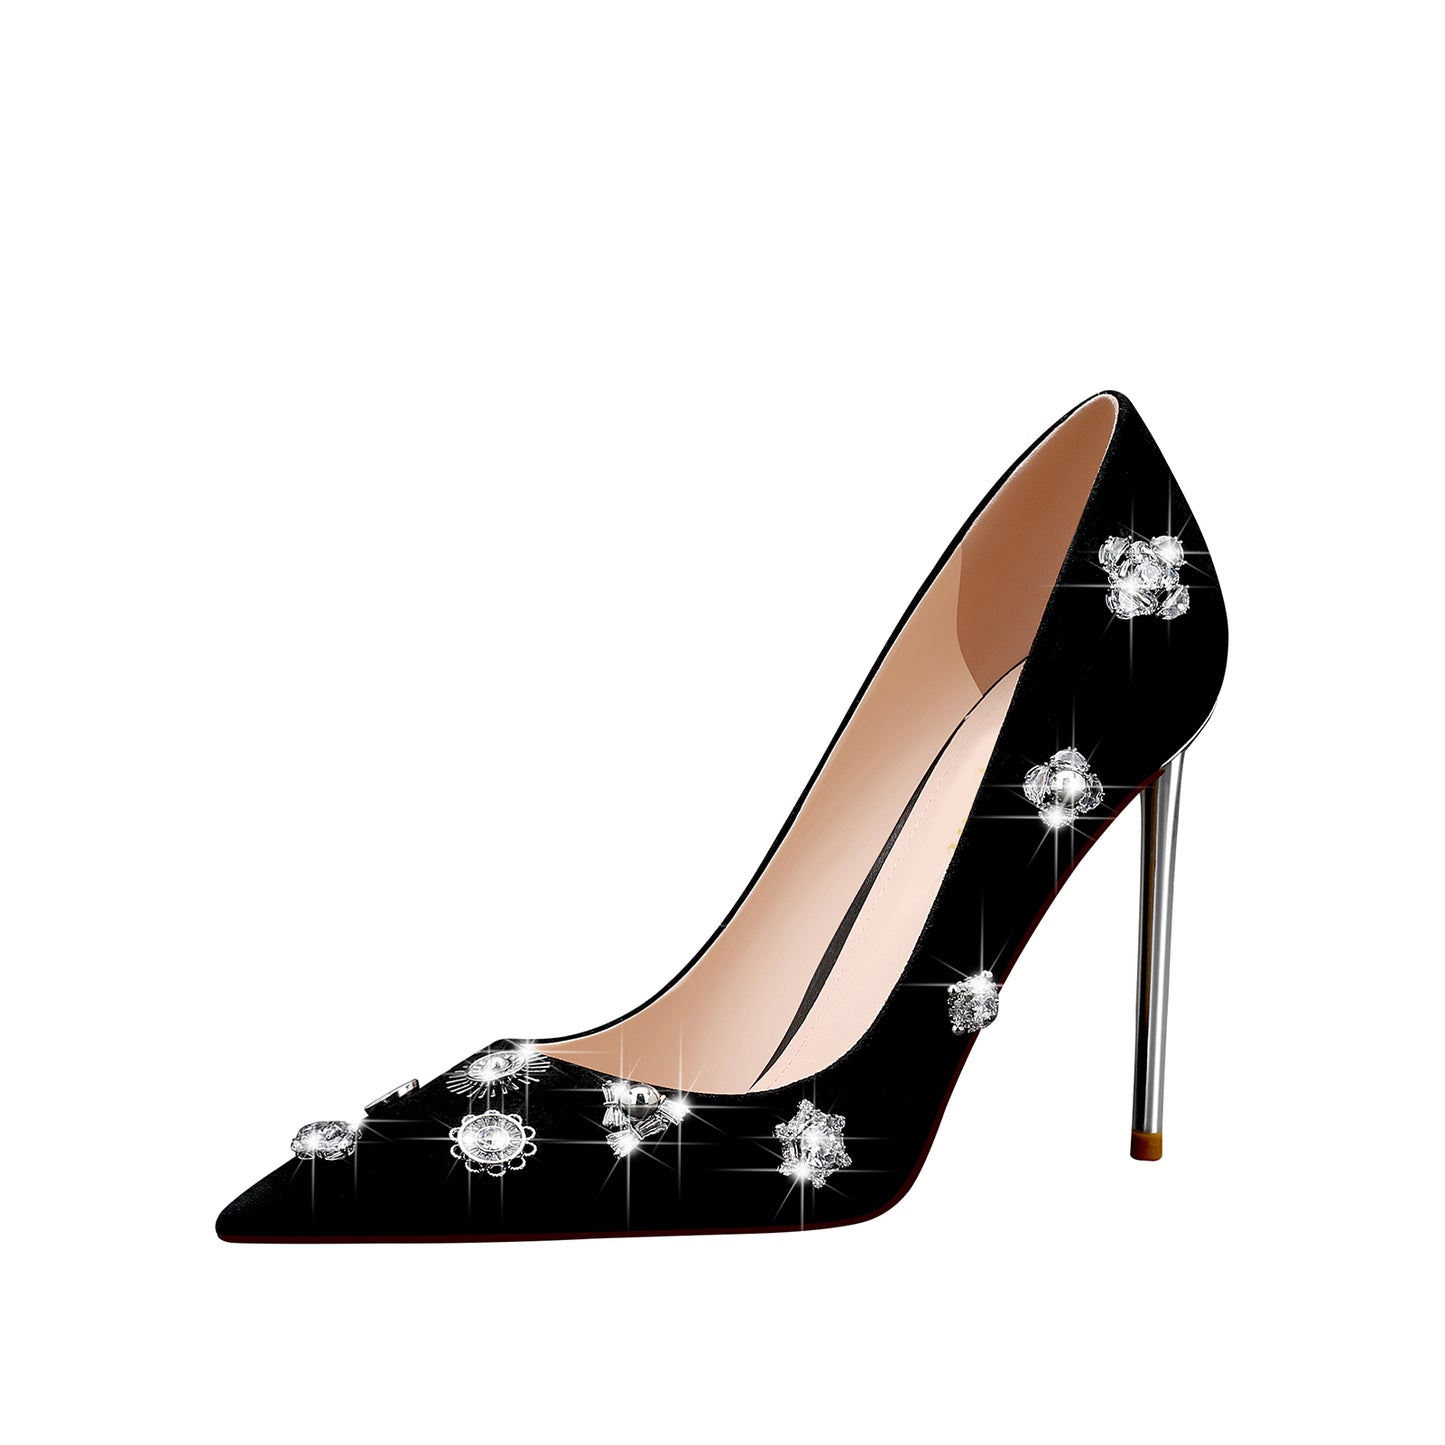 Stiletto High Heels Pumps for Women - Perfect for Proms and Special Occasions